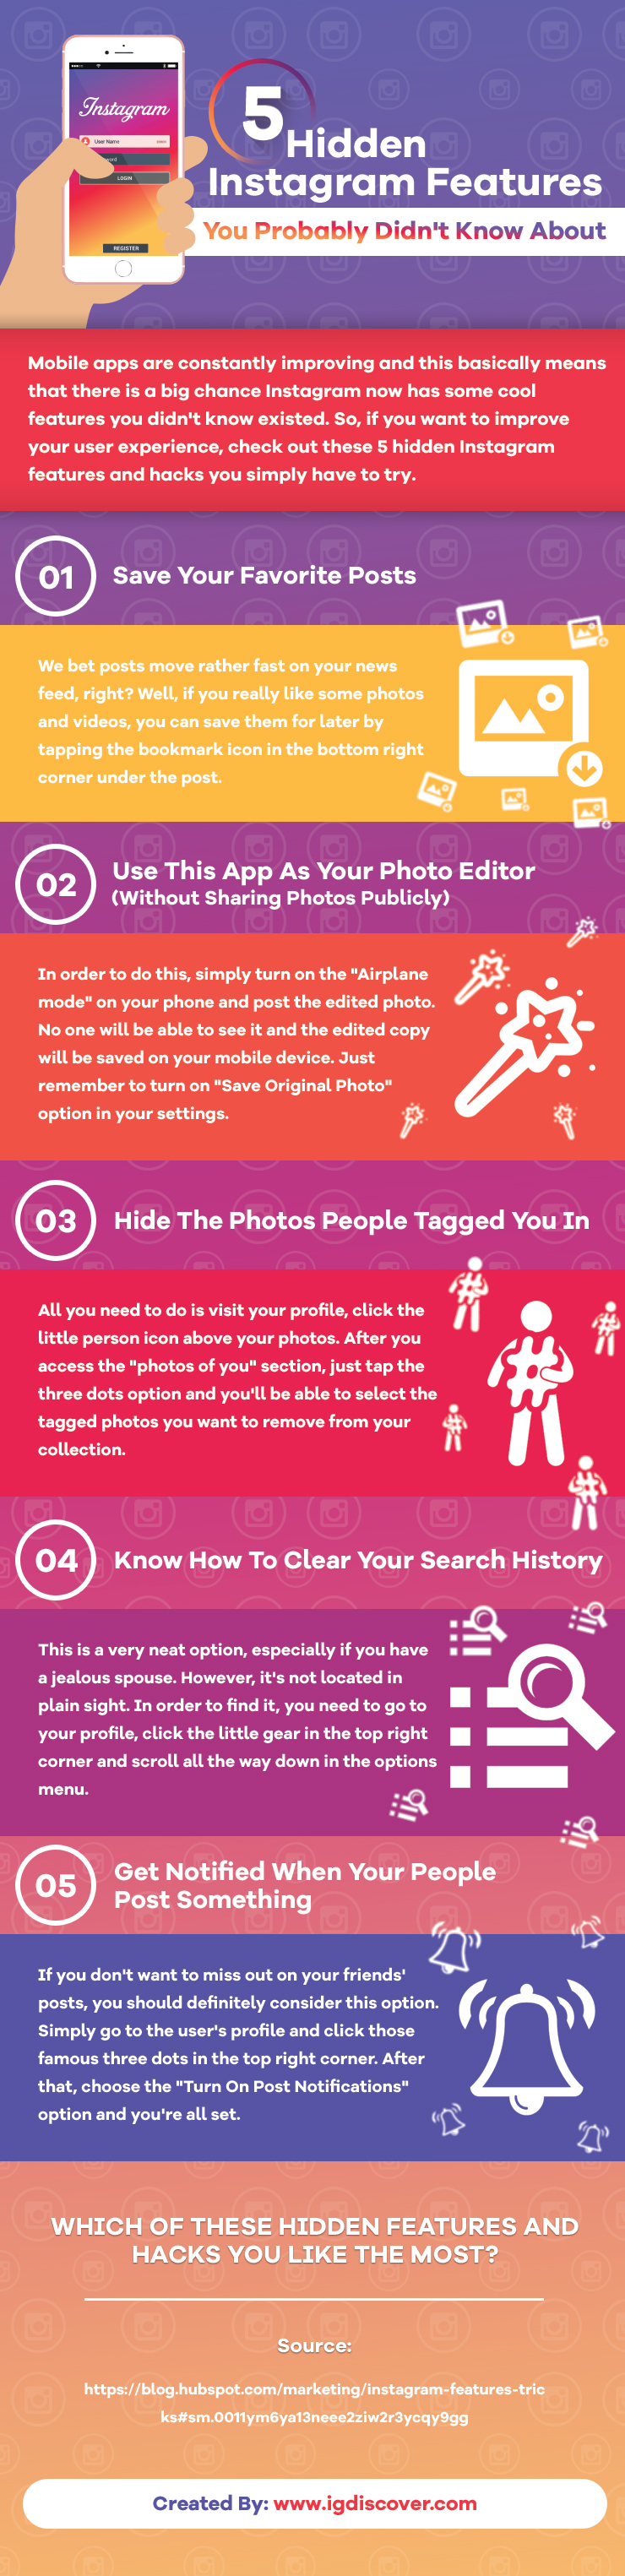 5 Hidden Instagram Features And Hacks You Probably Didnt Know About 